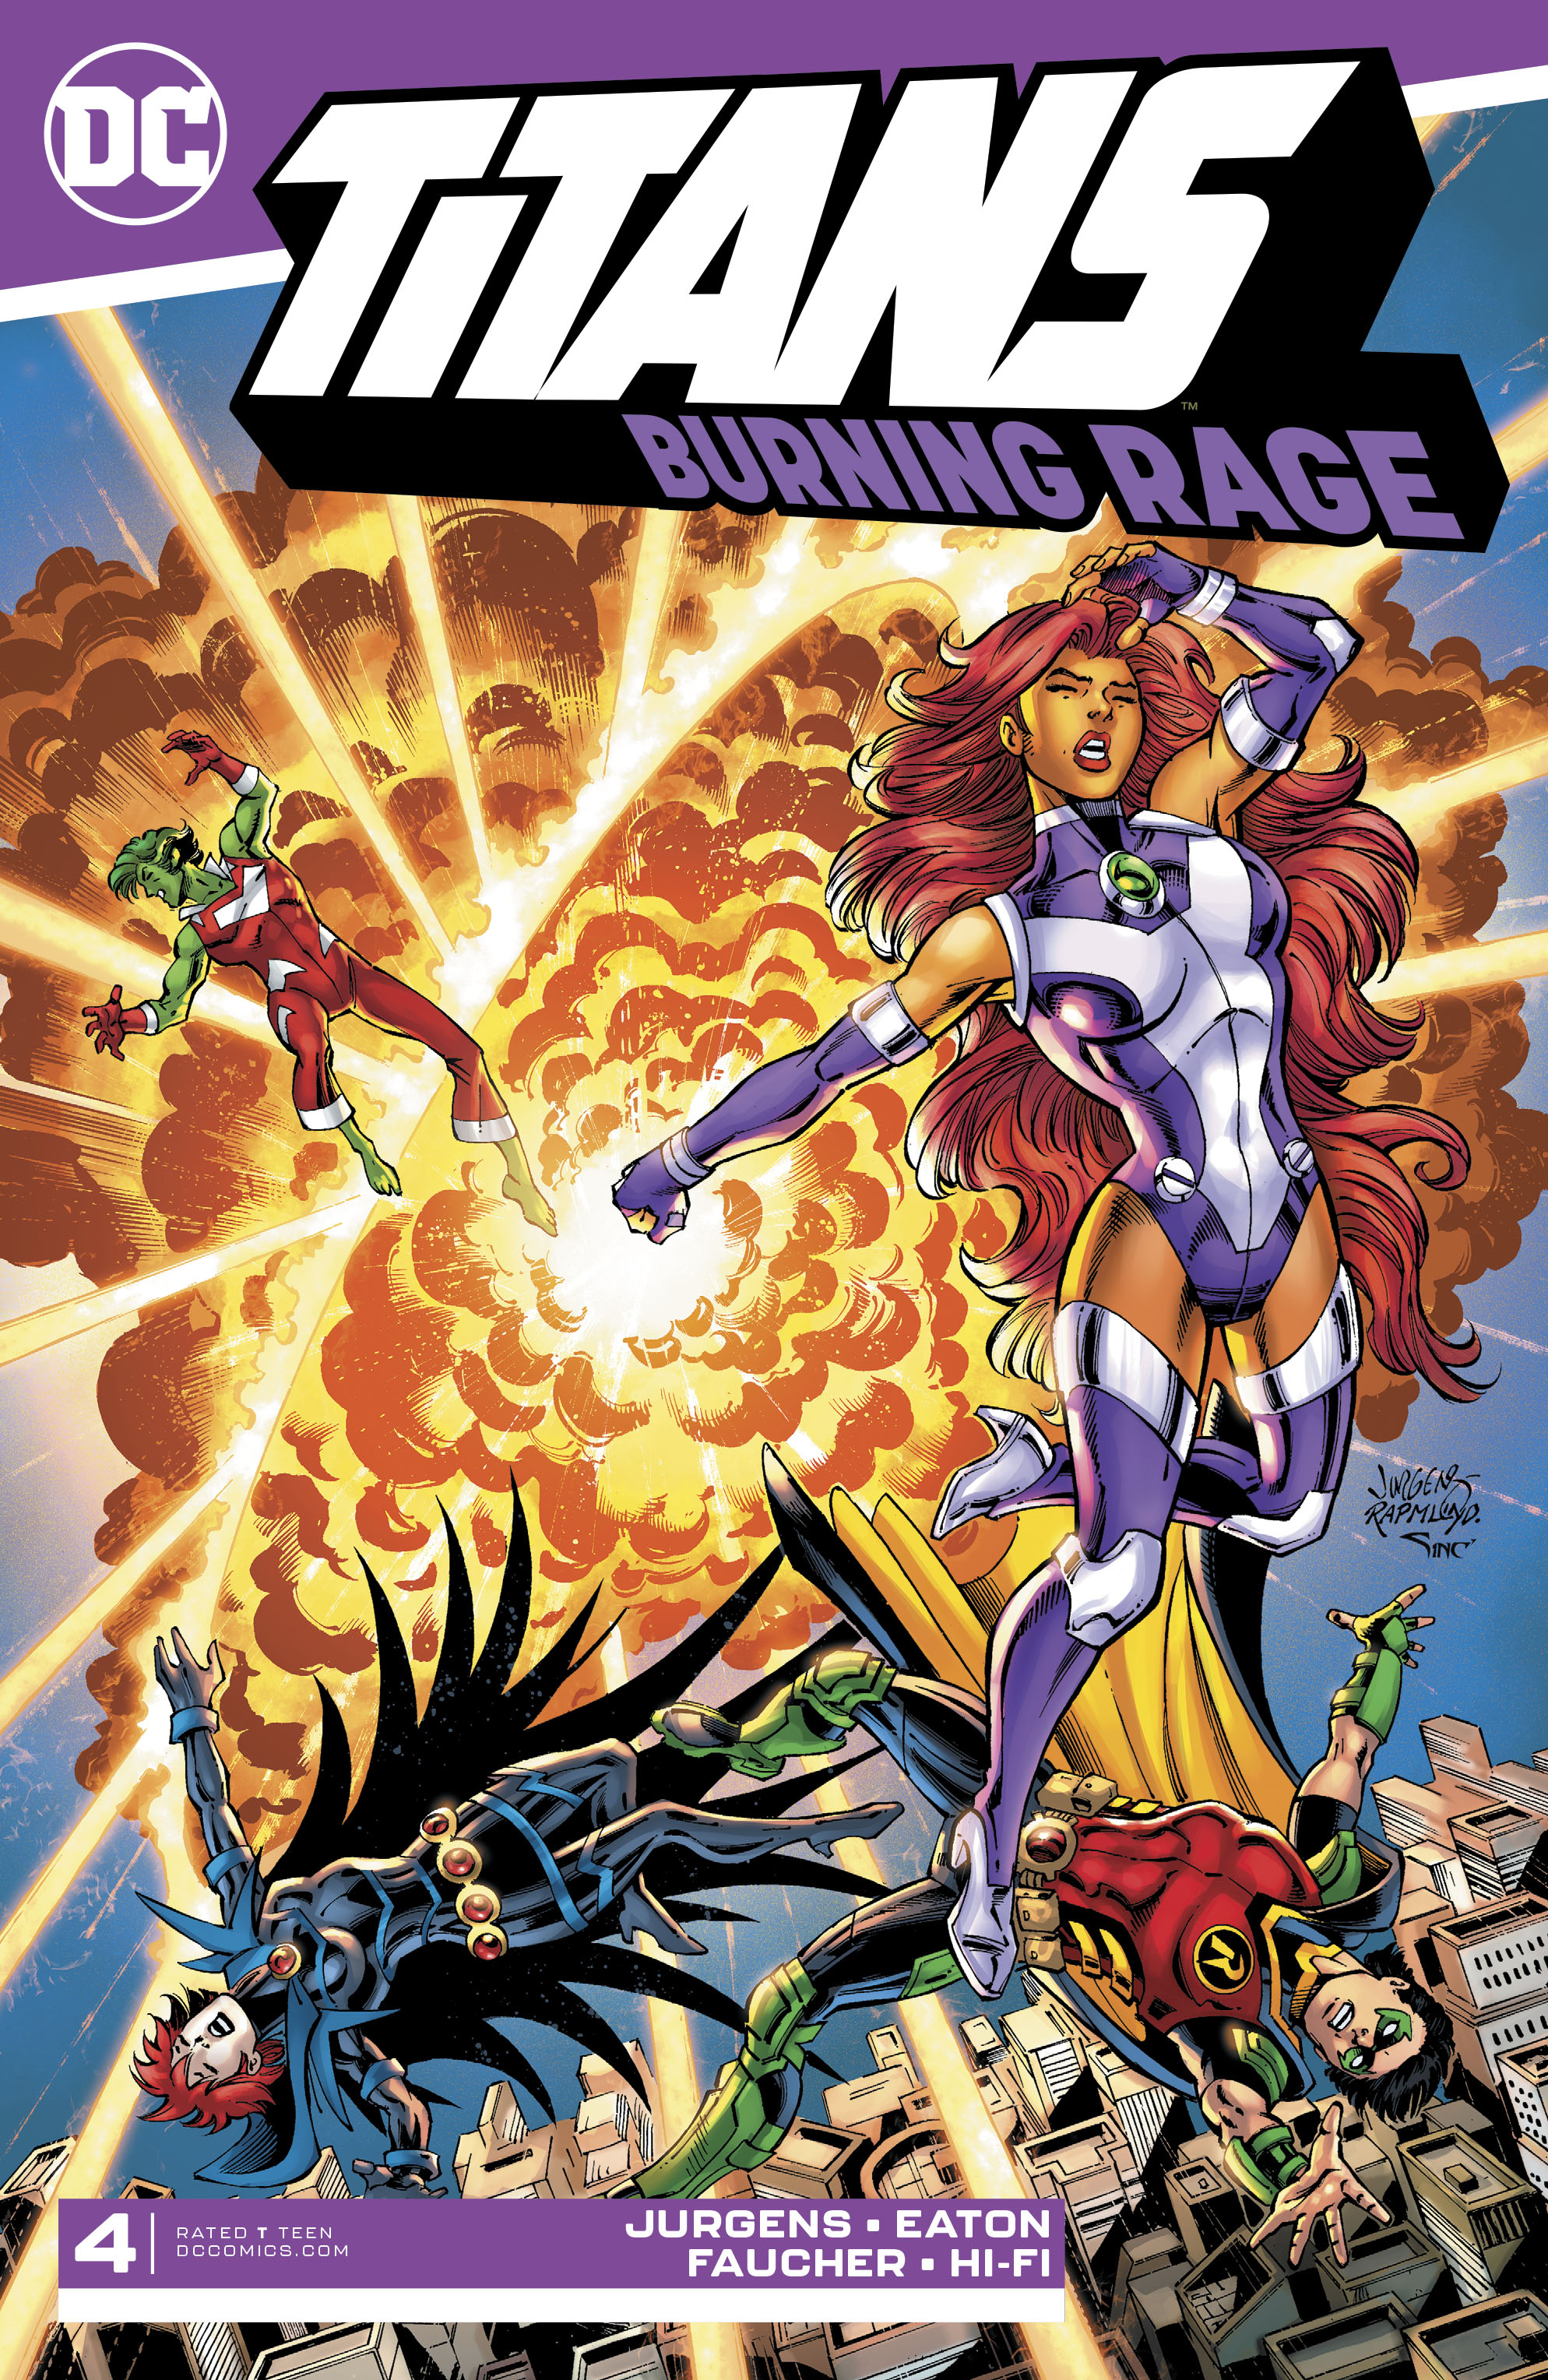 Read online Titans: Burning Rage comic -  Issue #4 - 1